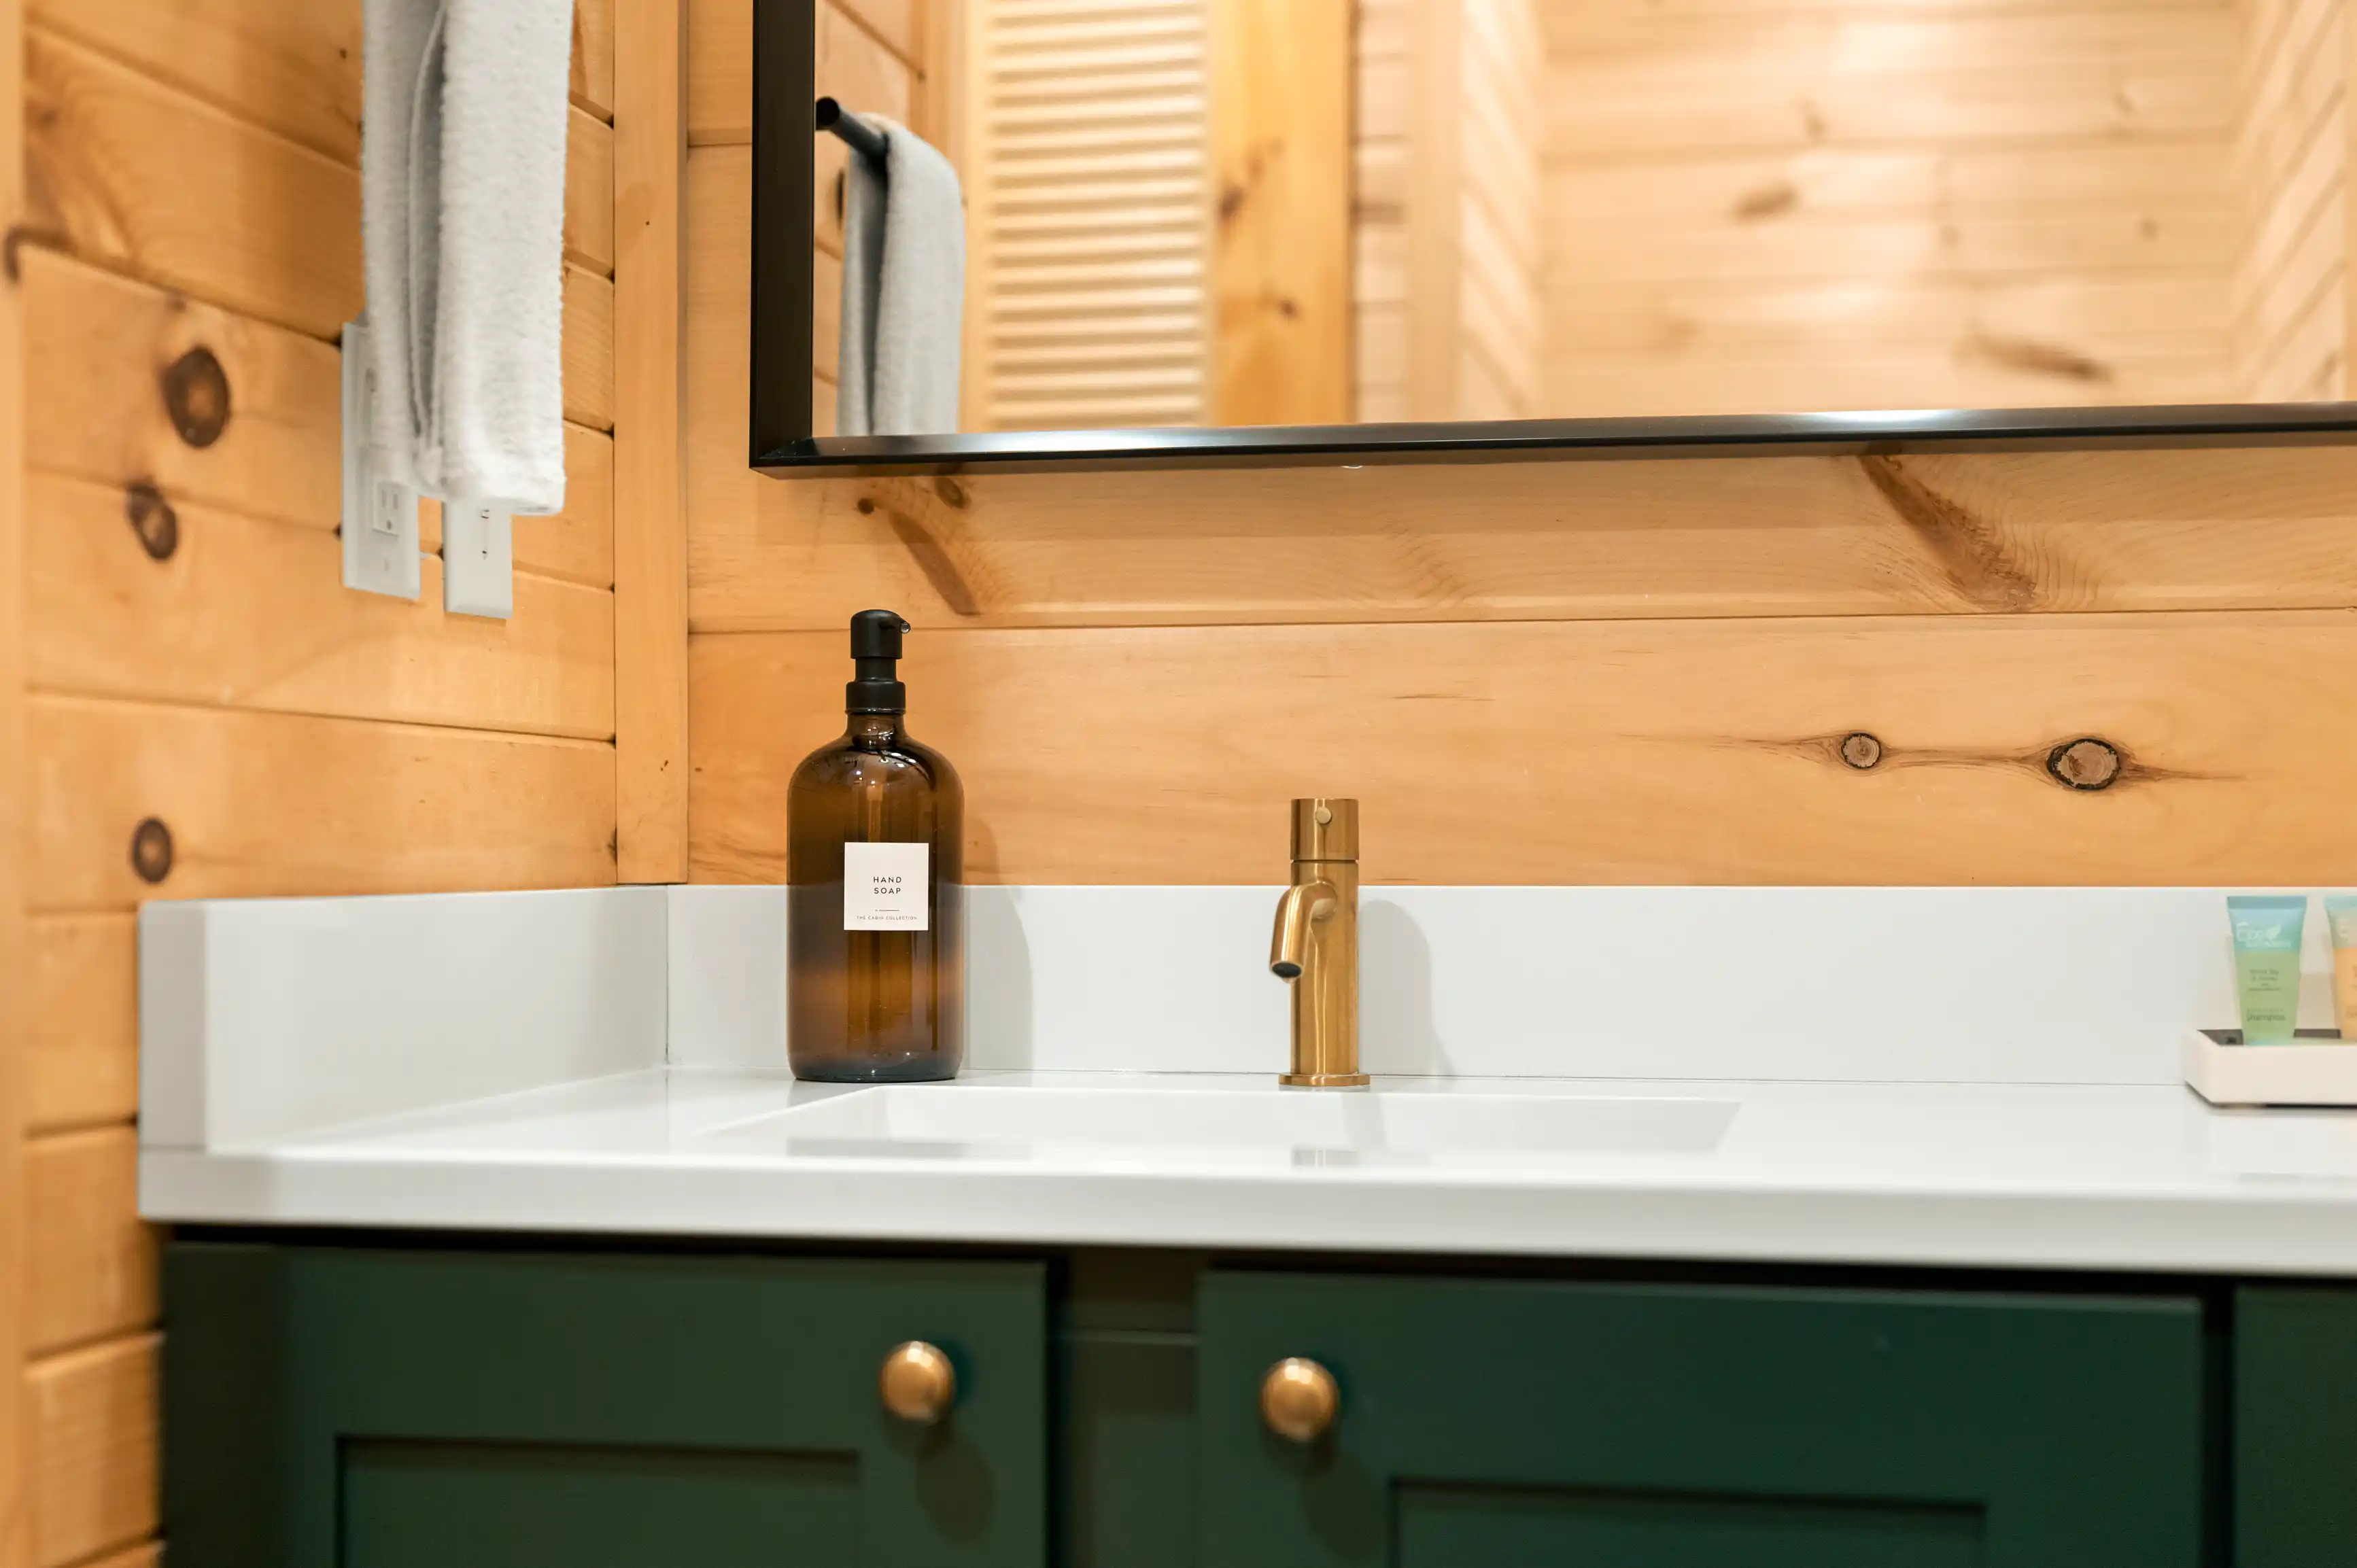 Modern bathroom interior with a white sink on a green vanity cabinet, amber glass soap dispenser, brass faucet, and mirror reflecting a wooden wall with a towel hanging.